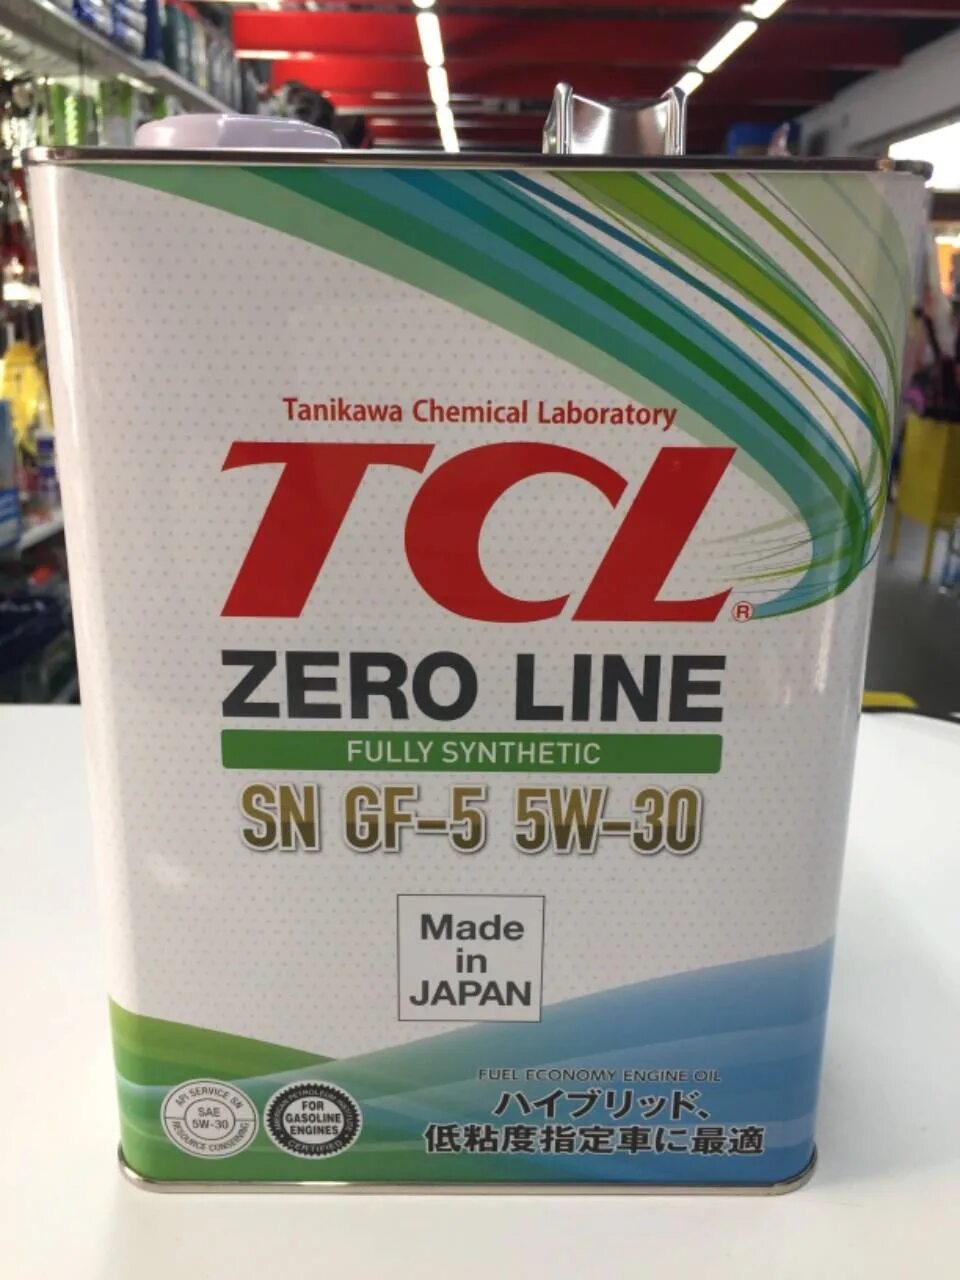 TCL Zero line 5w30. TCL Zero line 5w-20. TCL SN gf-5 5w-30. TCL 5w30 SP. Масло tcl 5w40